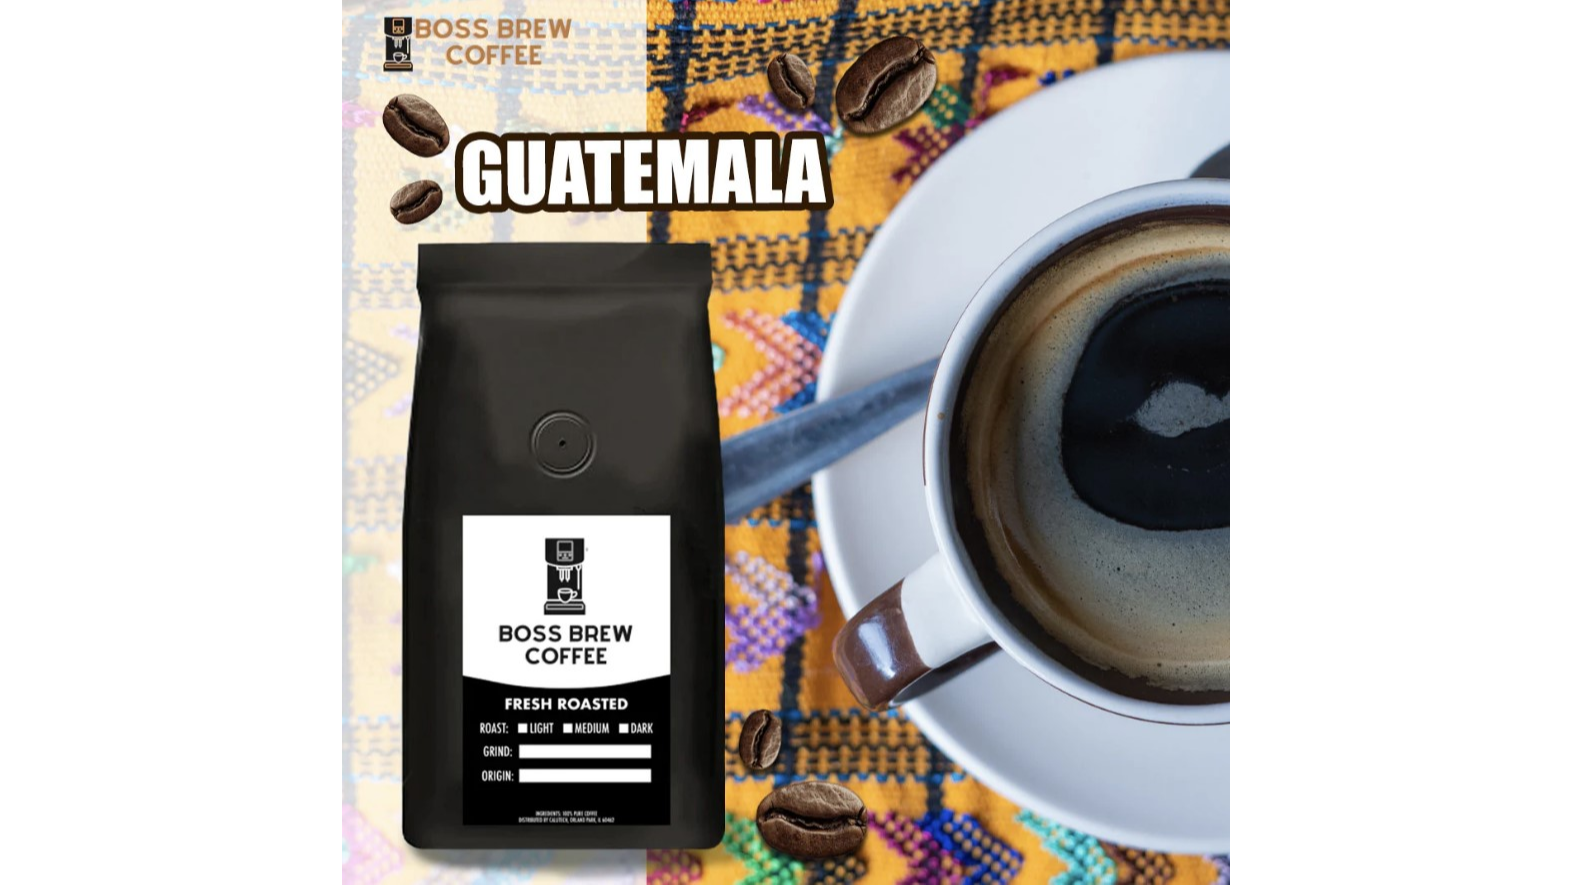 This Medium Roast Guatemala Coffee Has Caturra & Typica Beans, Ideal For Morning